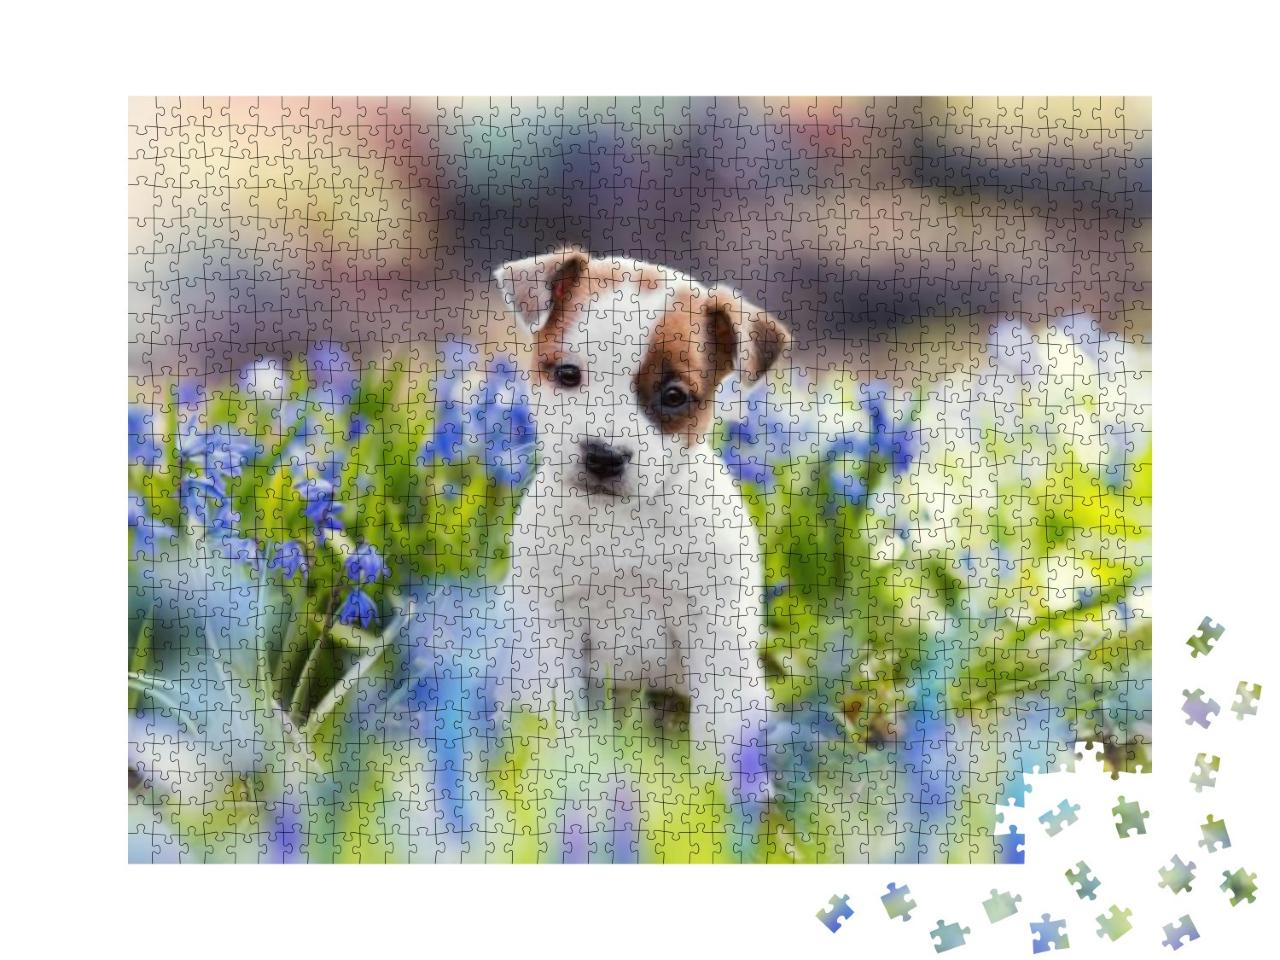 Puzzle 1000 Teile „Weißer Jack-Russell-Terrier-Welpe im Sommer“